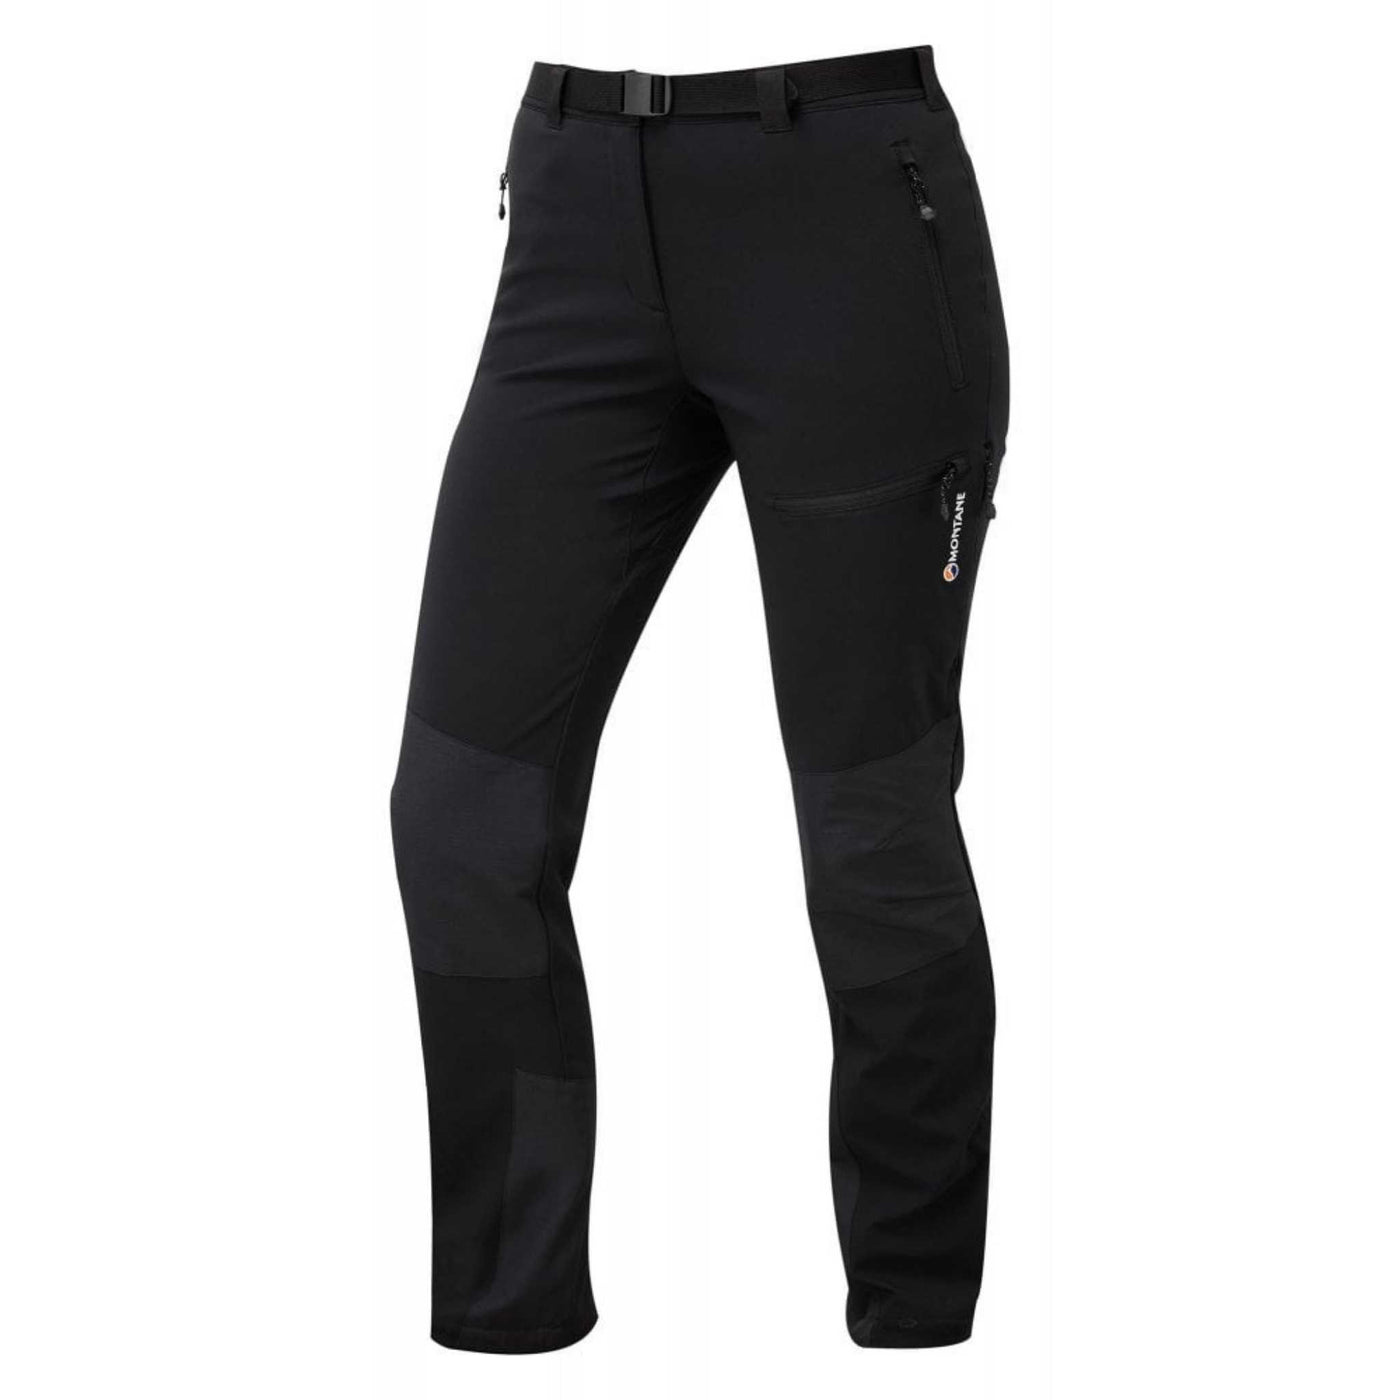 Terra Mission Pants Womens | Female Hiking and Alpine Pants | Further Faster Christchurch NZ #black